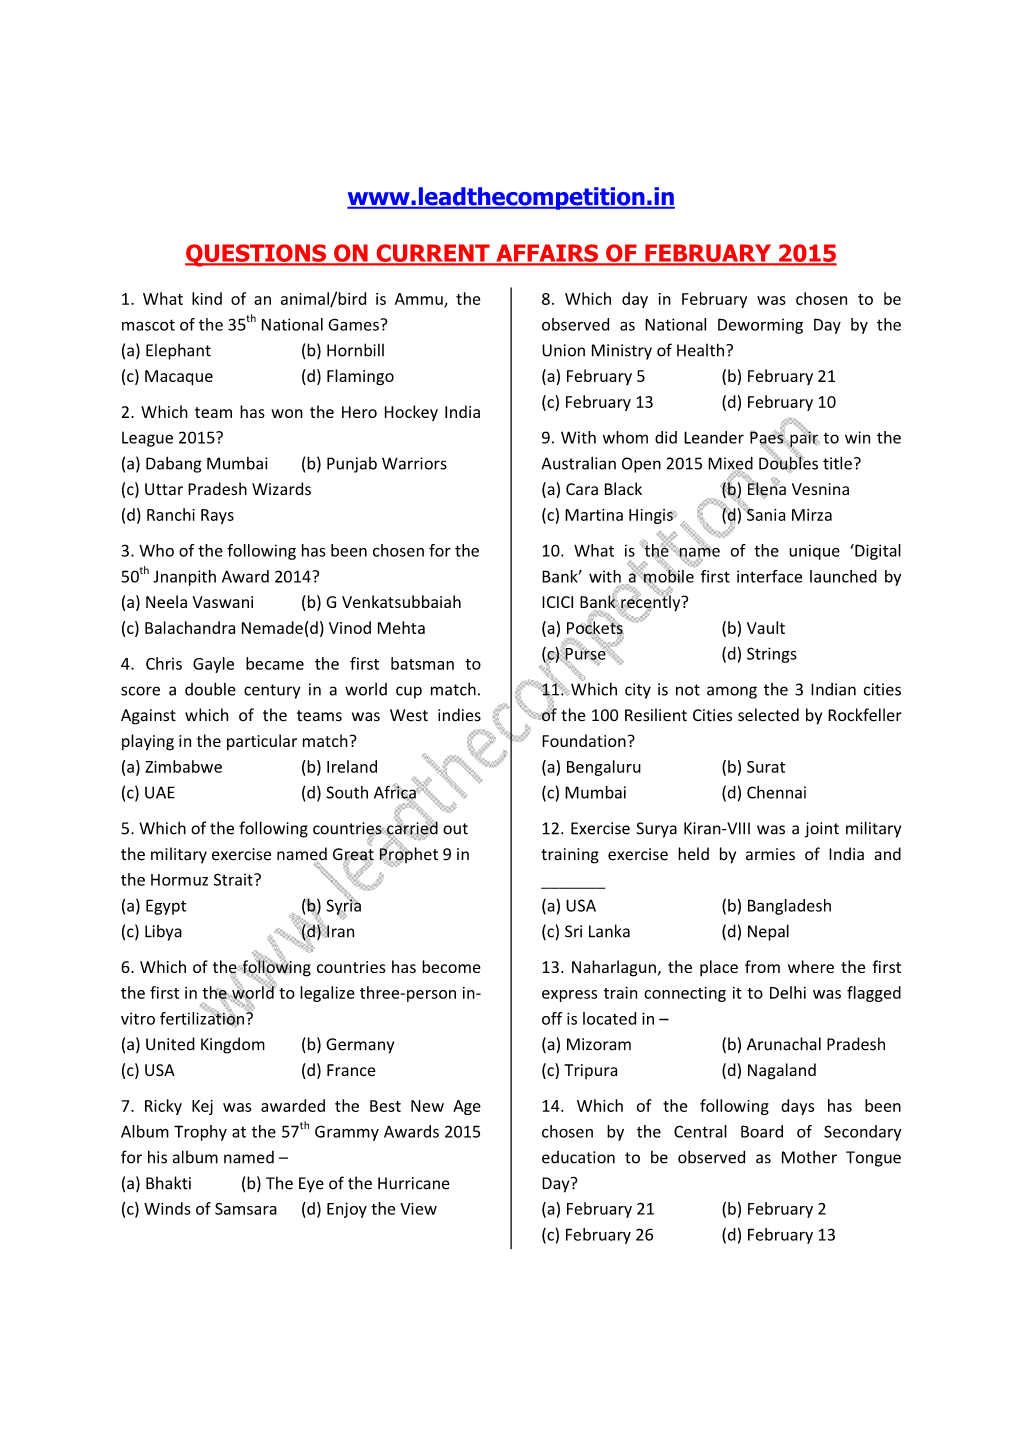 Questions on Current Affairs of February 2015